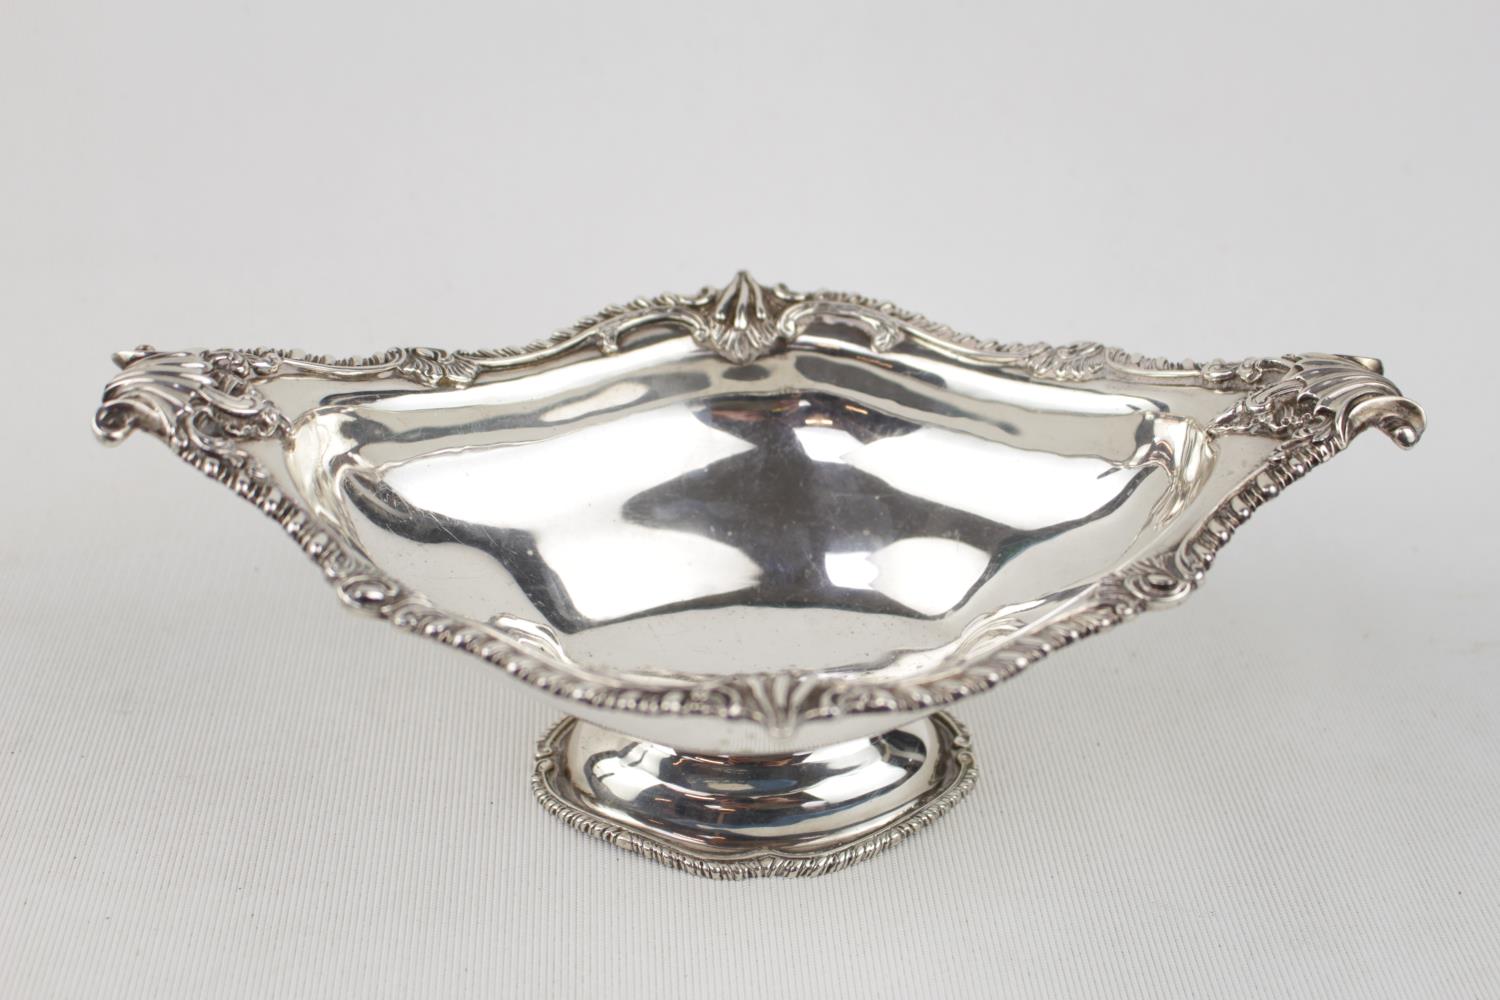 Edwardian Georgian Style Boat shaped dish with foliate border and scallop handles by Charles